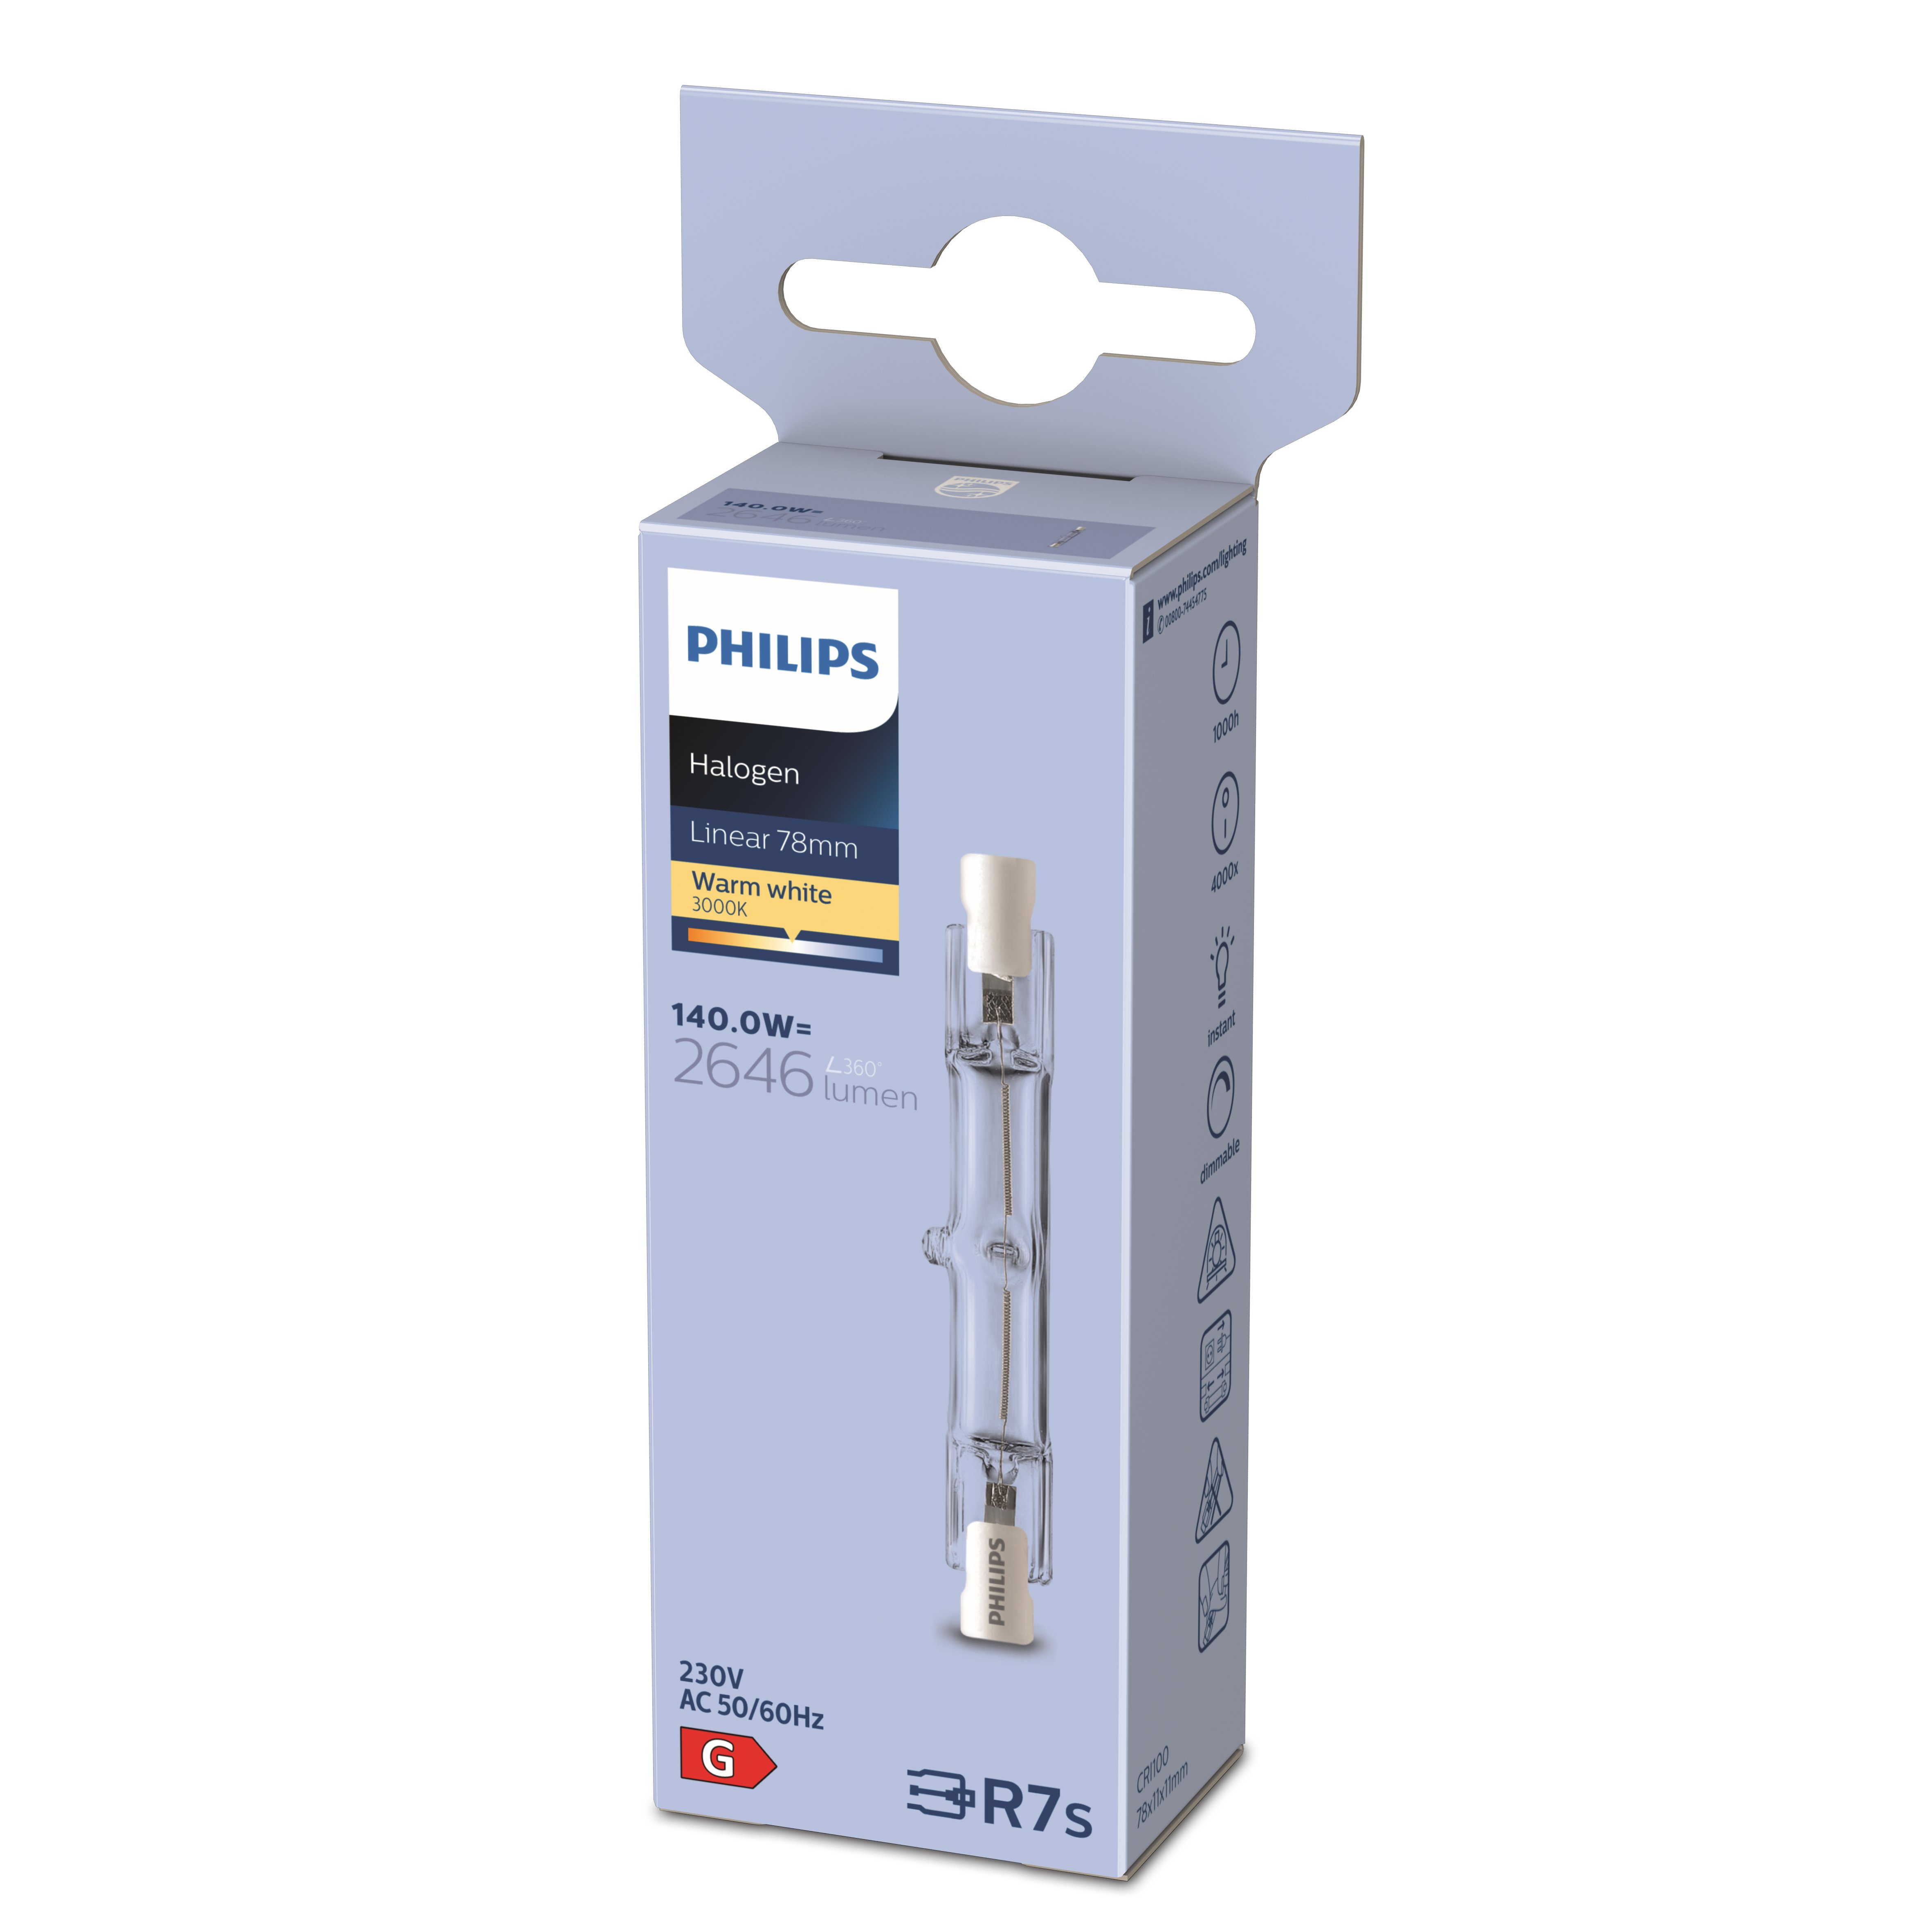 PHILIPS Halo Linear Halogen Stab R7s, 140.0 W, 3000 K, 2646 lm, 78 mm, dimmbar